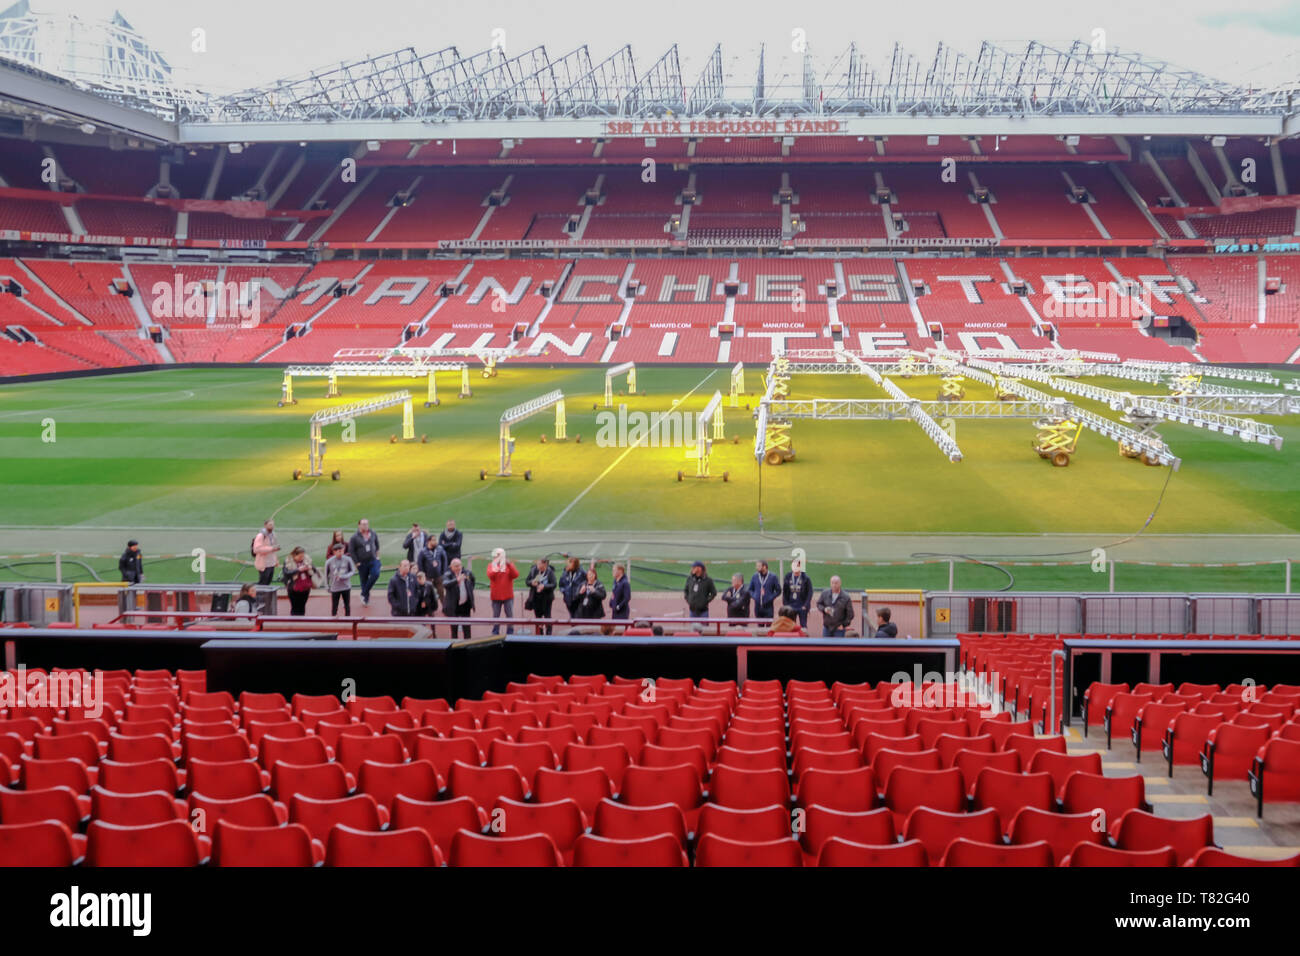 Old Trafford, Manchester, UK - January 20, 2019: Manchester United football stadium, looking at the Alex Ferguson Stand and shows a group of fans havi Stock Photo